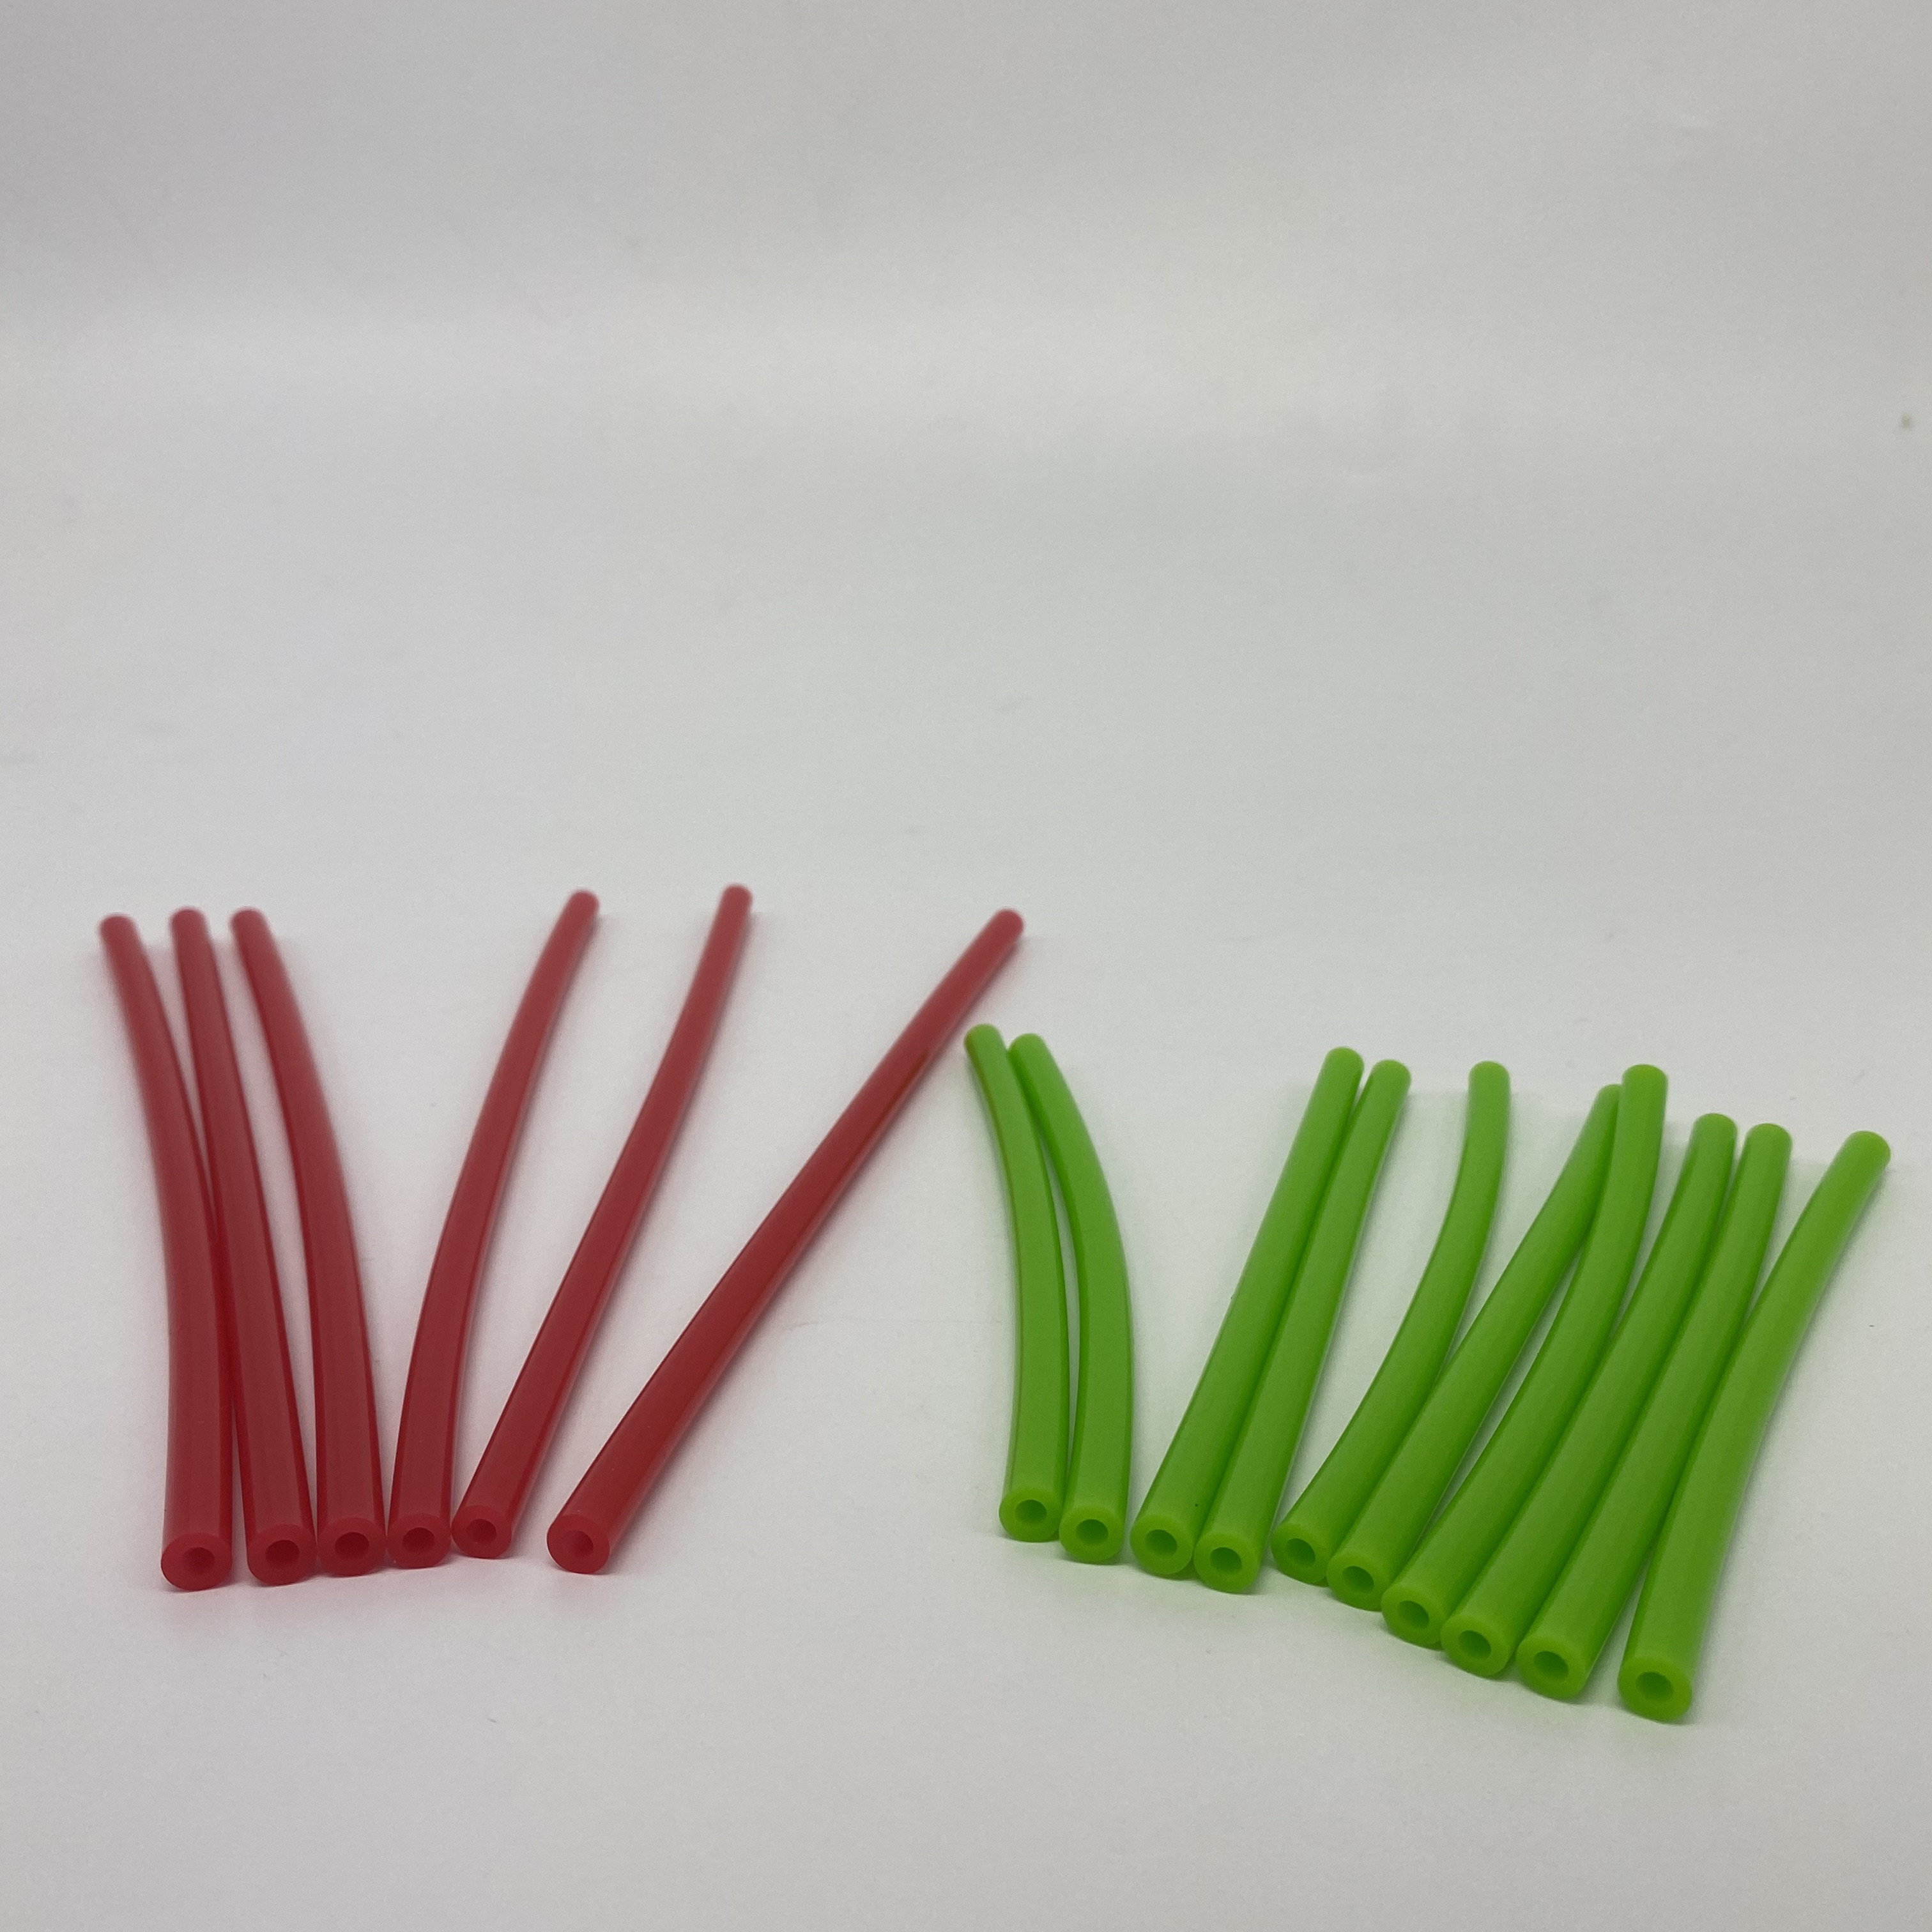 Transparent Soft Food Grade Silicone Rubber Recycled Pipe